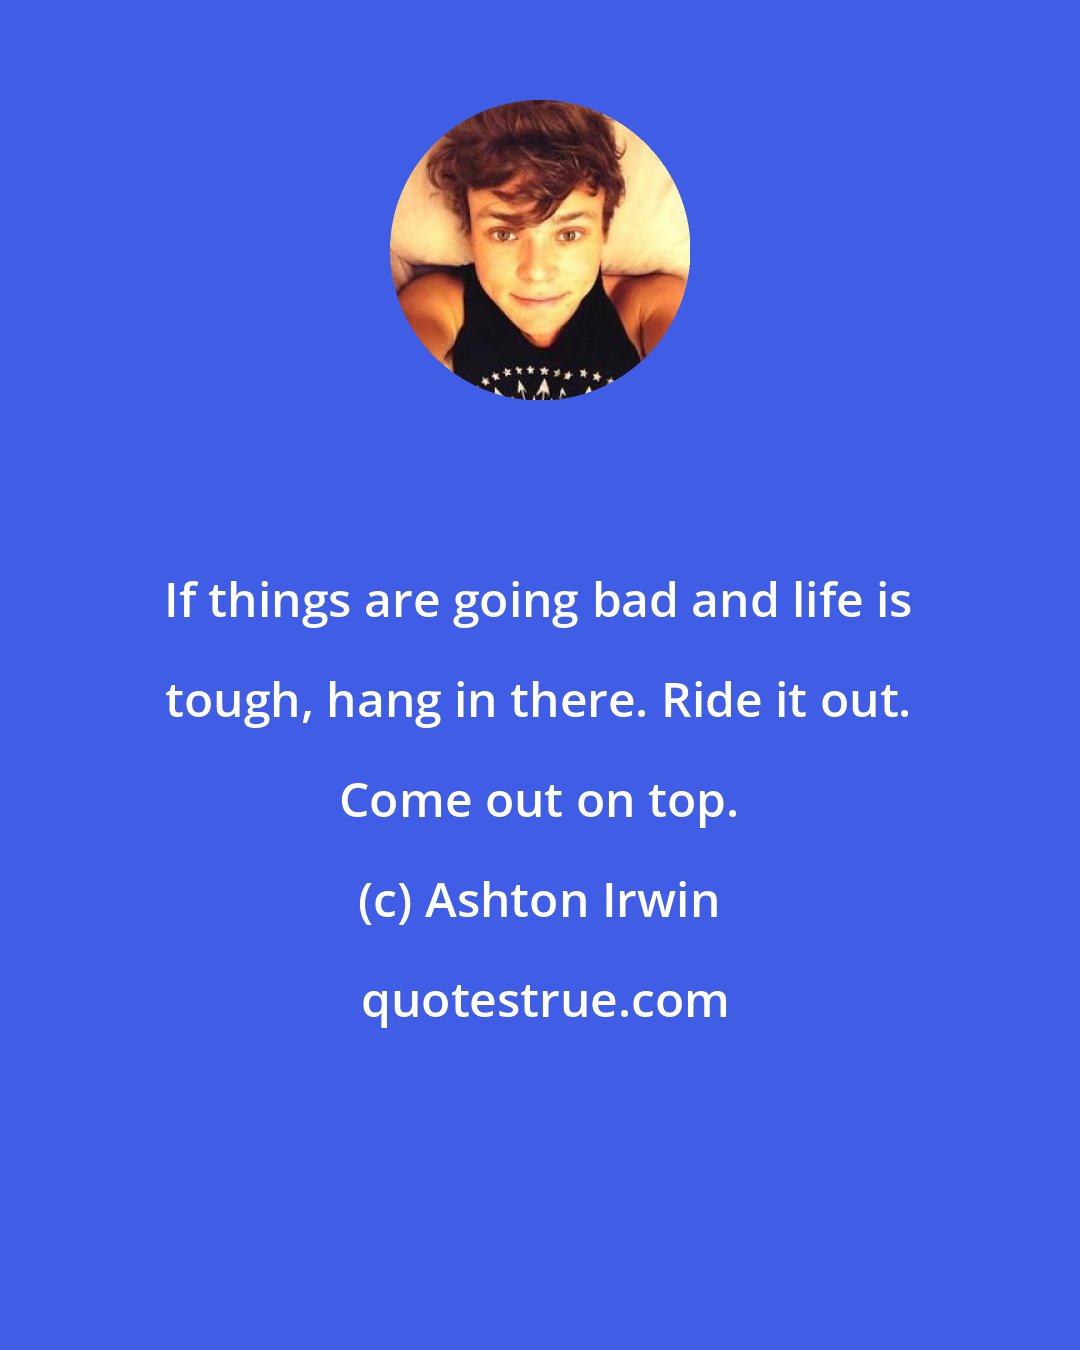 Ashton Irwin: If things are going bad and life is tough, hang in there. Ride it out. Come out on top.